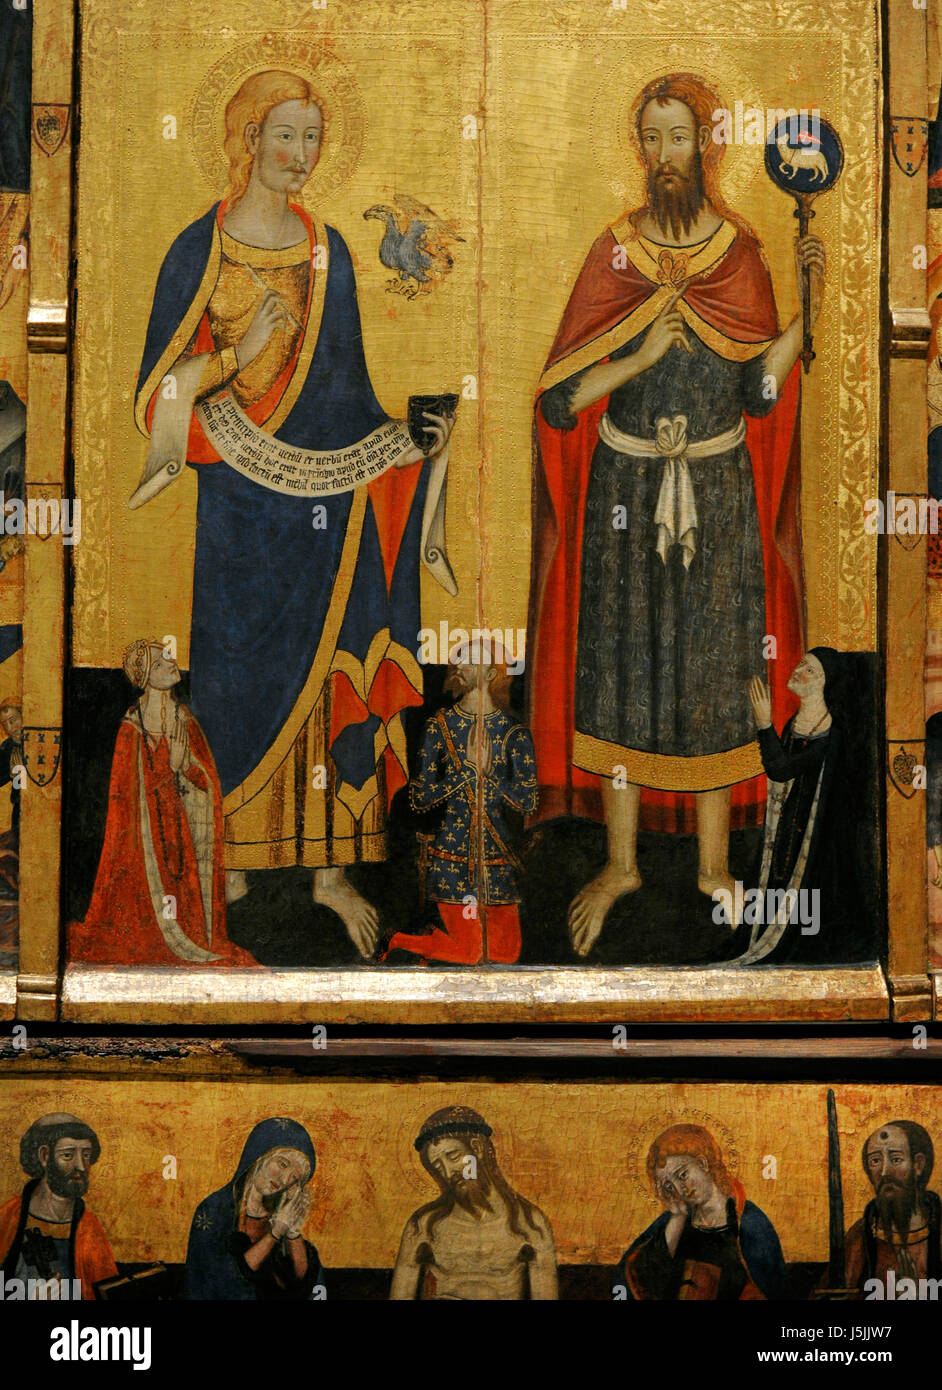 Master of Santa Coloma de Queralt (active in the third quarter of the 14th century). Altarpiece of the Saints John. ca.1356. Detail depicting Saint John the Baptist and Saint John the Evangelist with three donors. From the Chapel of the Castle of Santa Coloma de Queralt (Catalonia). National Art Museum of Catalonia. Barcelona. Catalonia. Spain. Stock Photo